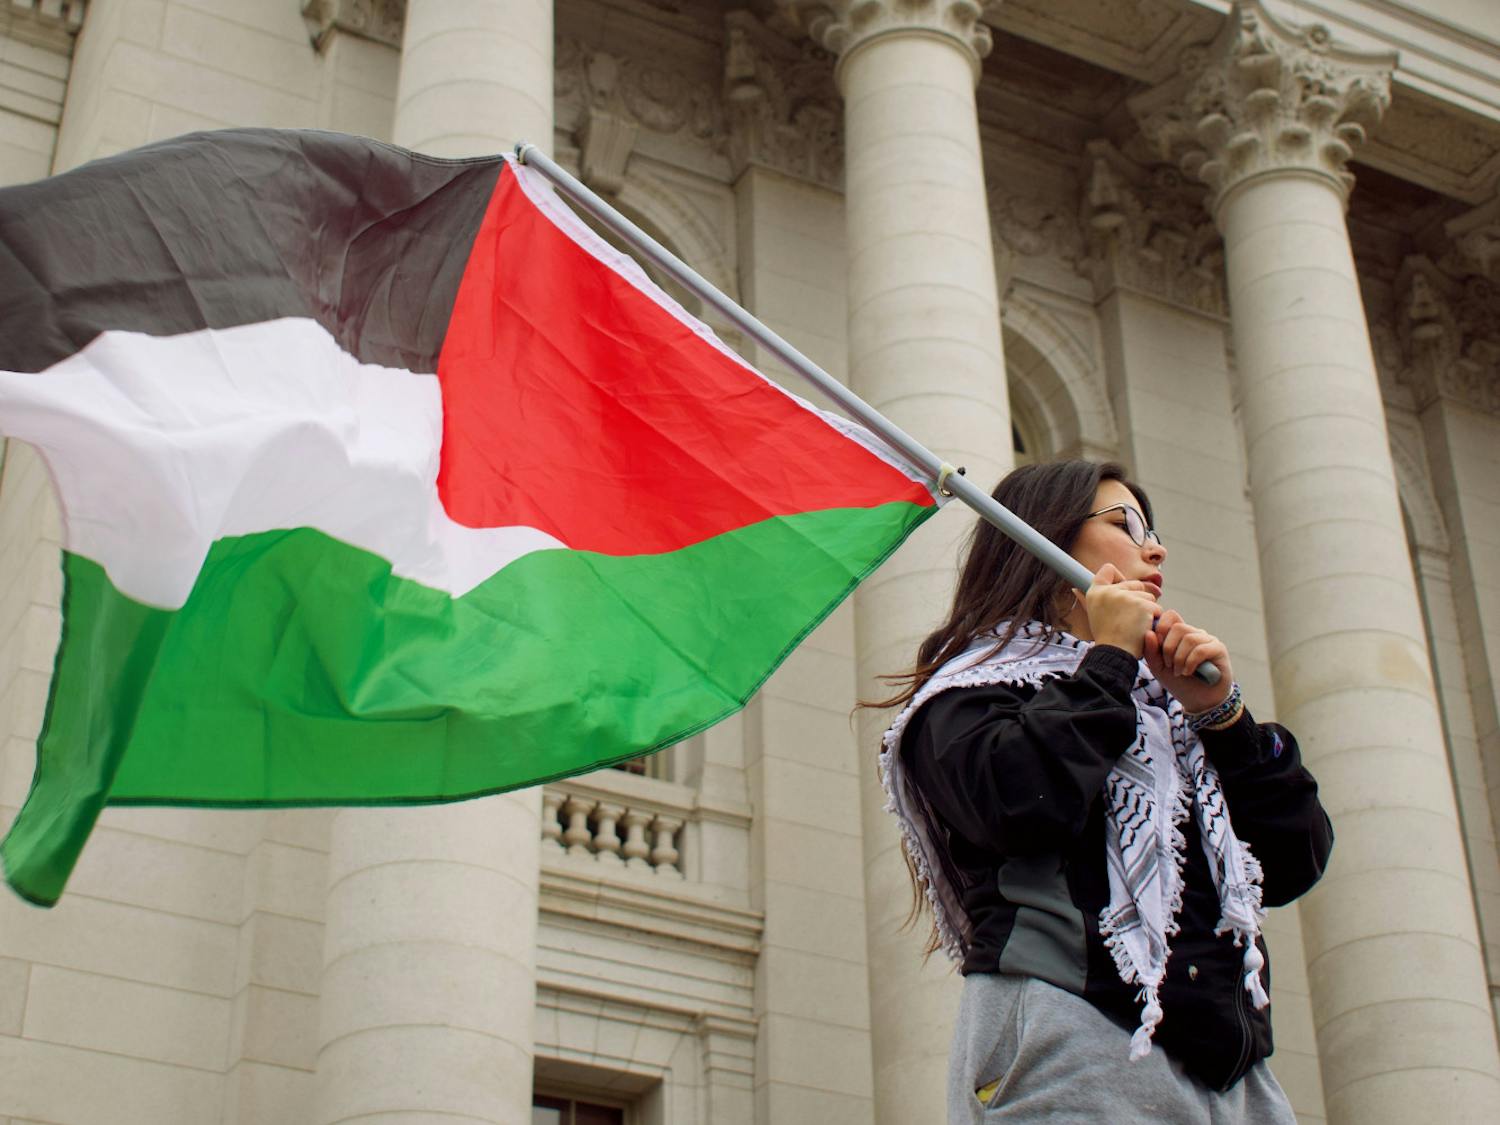 PHOTOS: ‘Wisconsin All Out for Palestine’ protest demands Gaza ceasefire at the Capitol